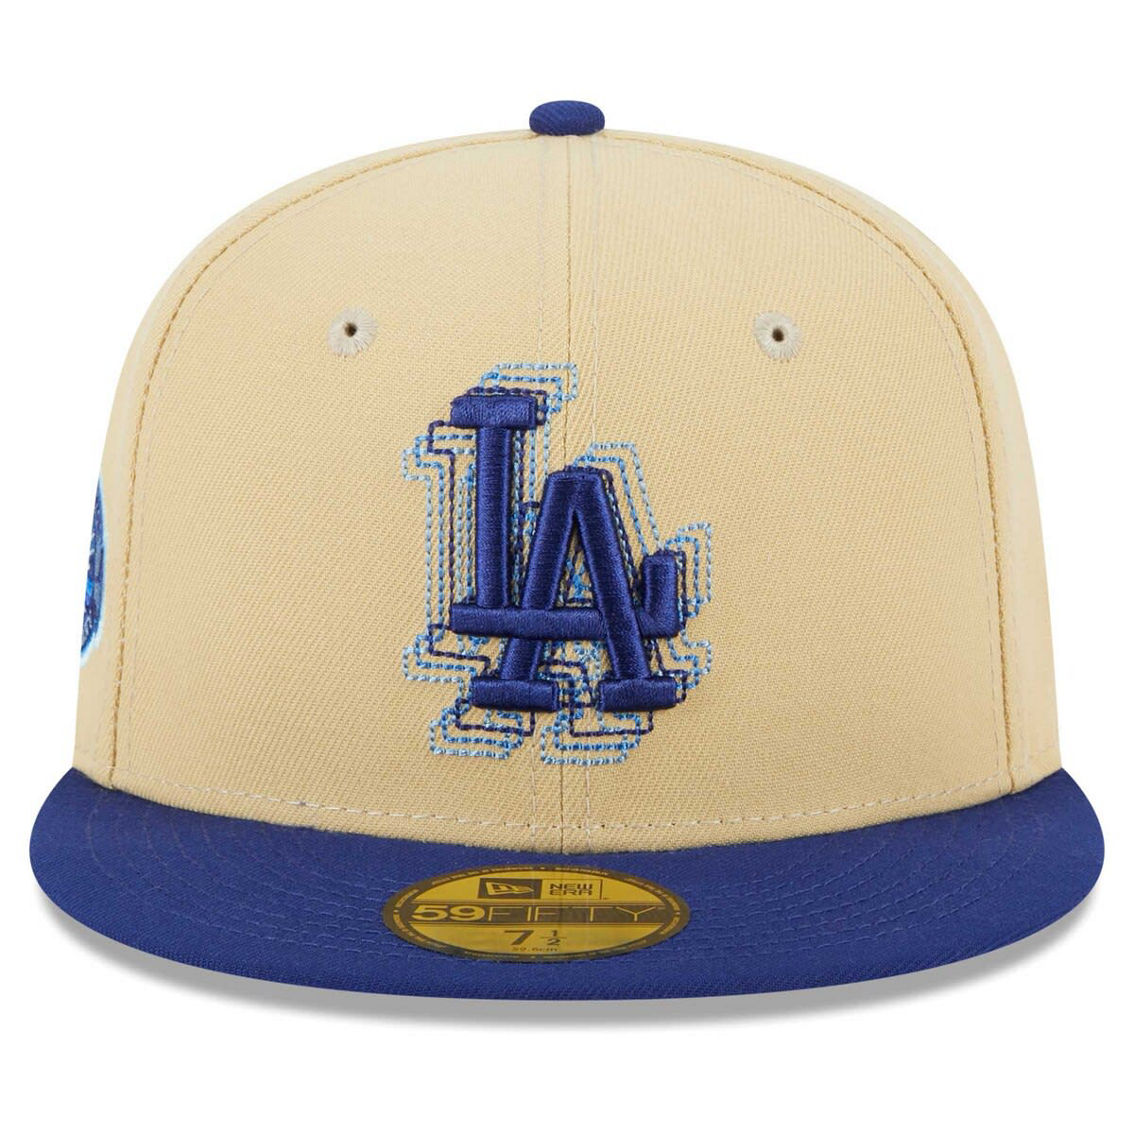 New Era Men's Cream/Royal Los Angeles Dodgers Illusion 59FIFTY Fitted Hat - Image 3 of 4